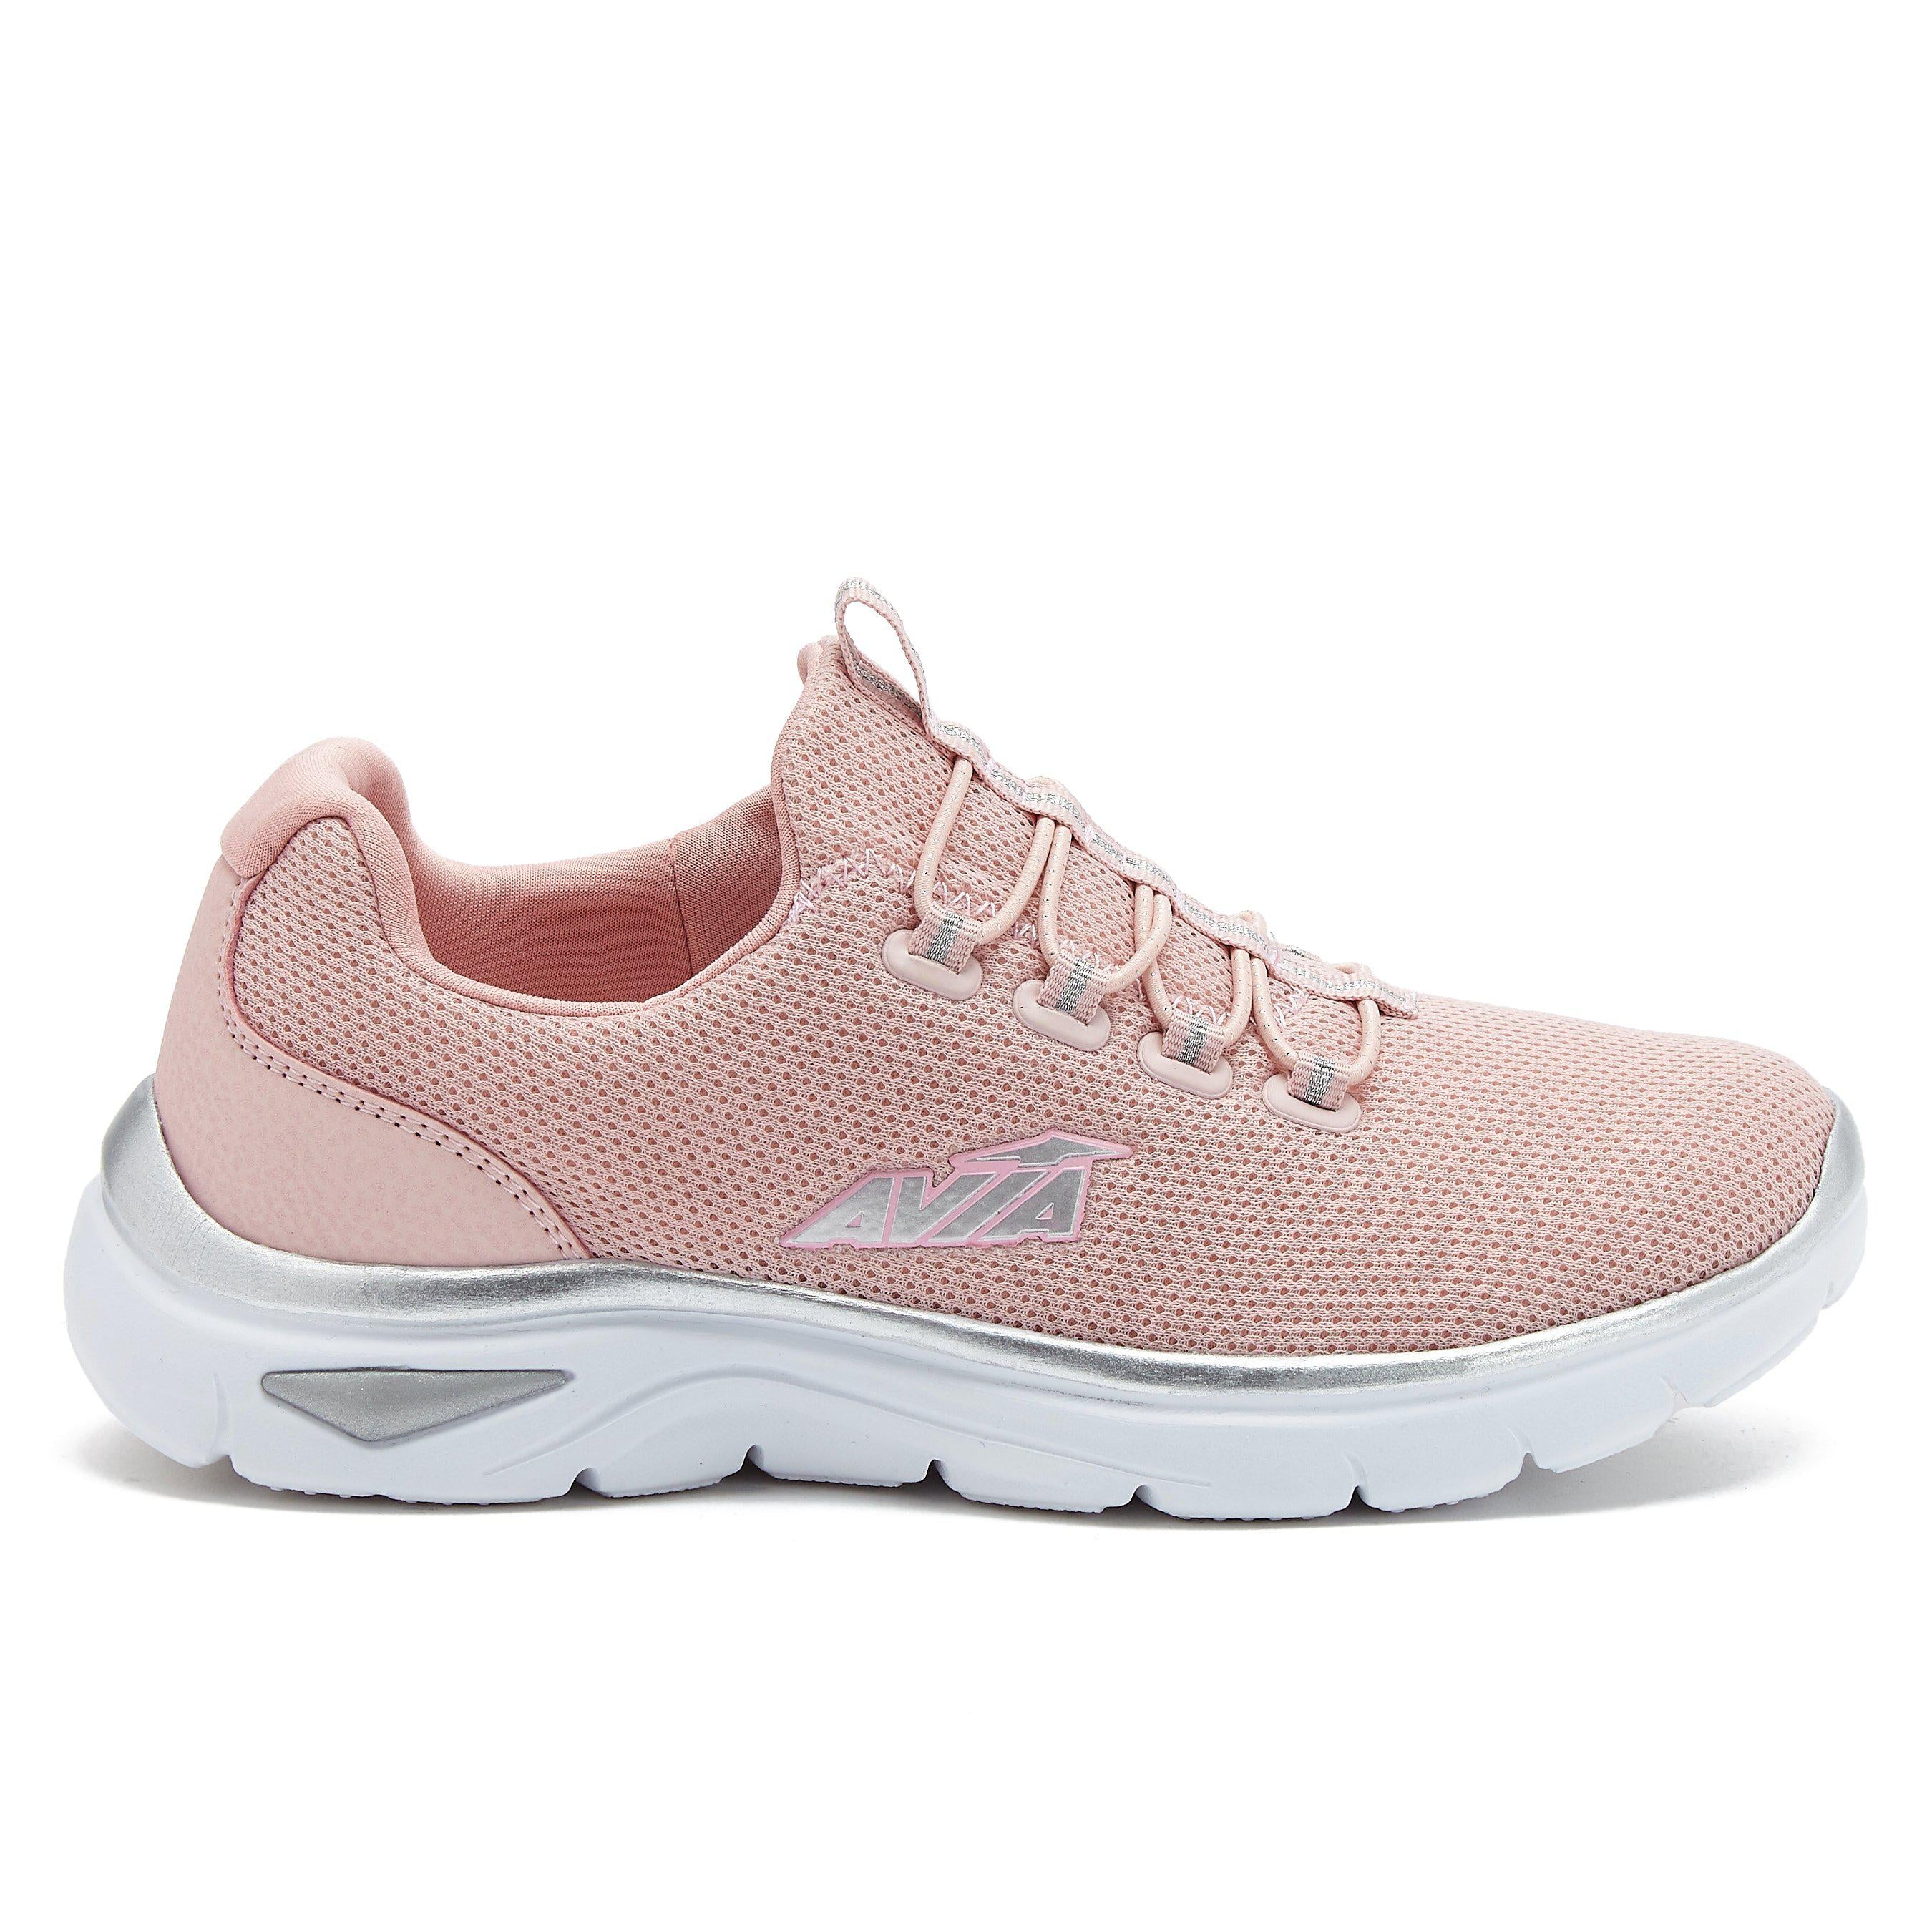 Women's Athletic Shoes, Women's Casual Sneakers